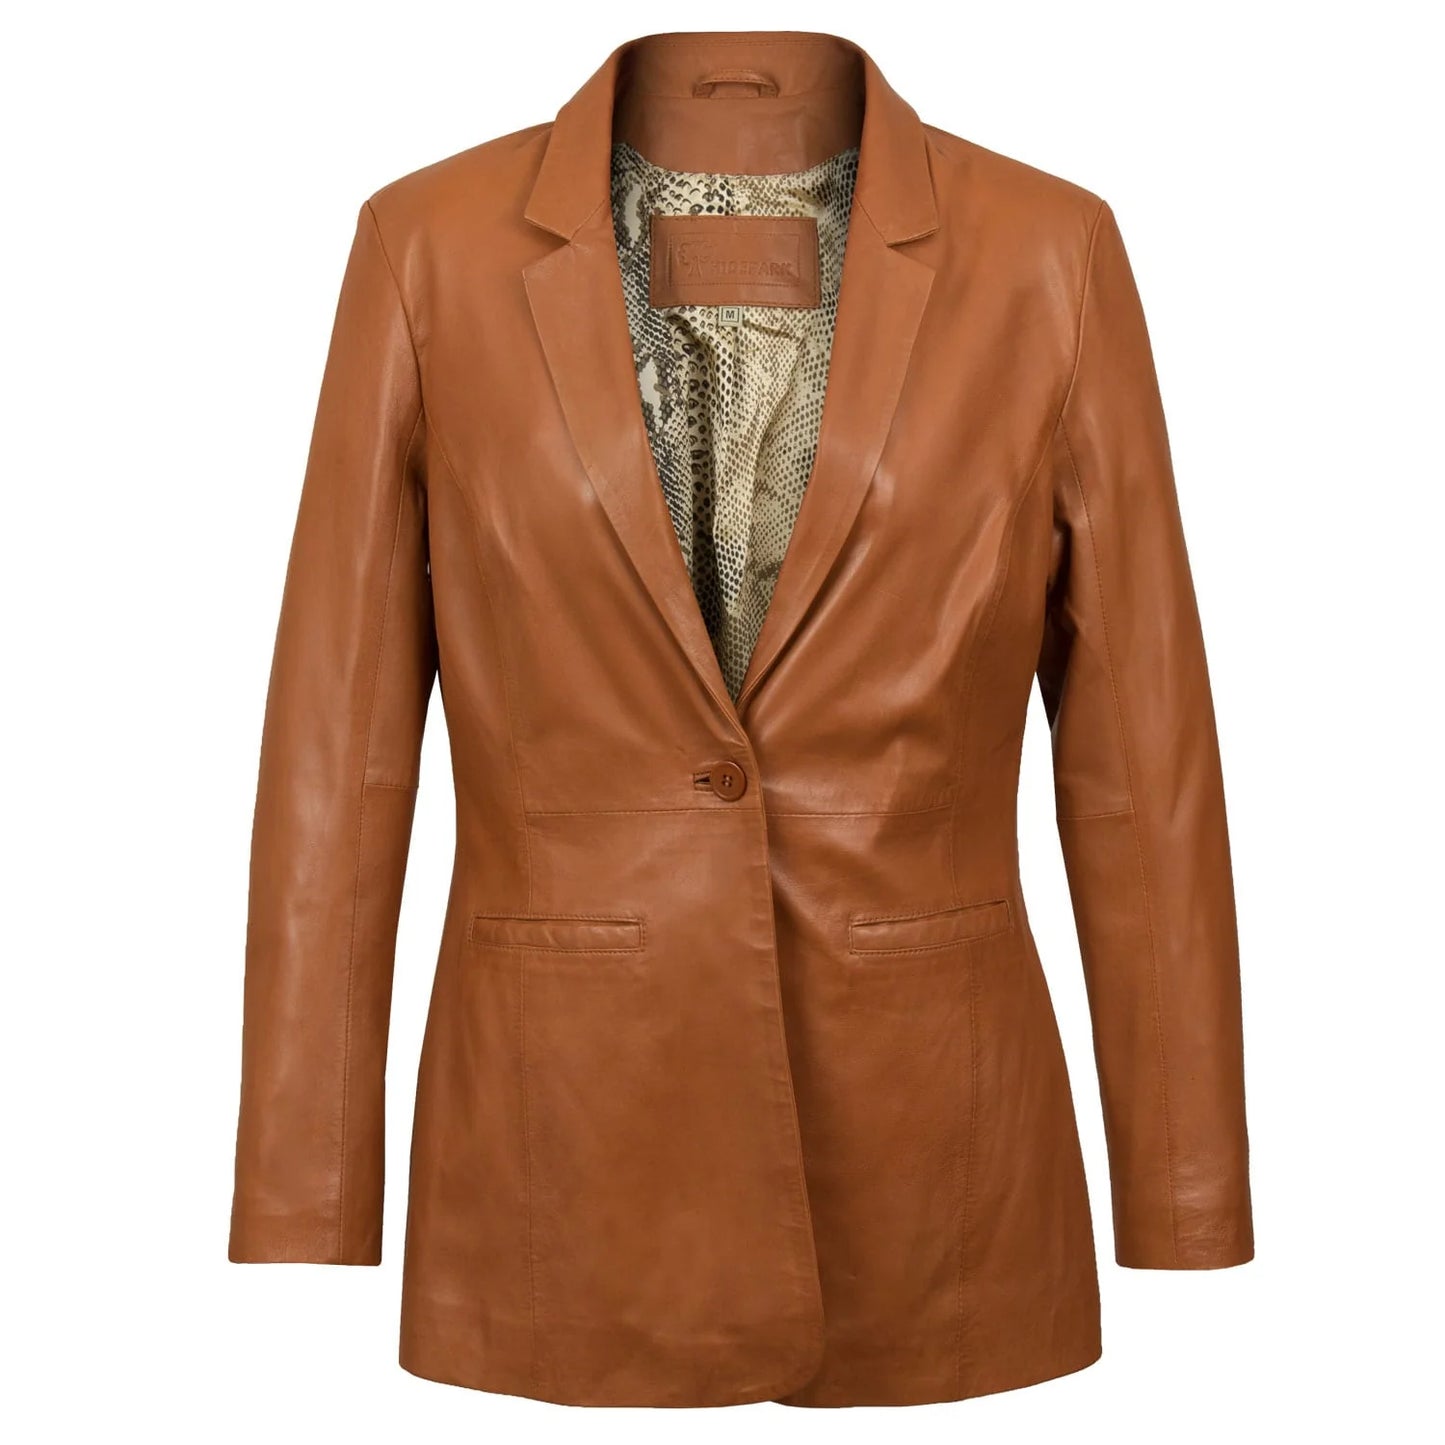 Women's Stylish Fitted Leather Blazer